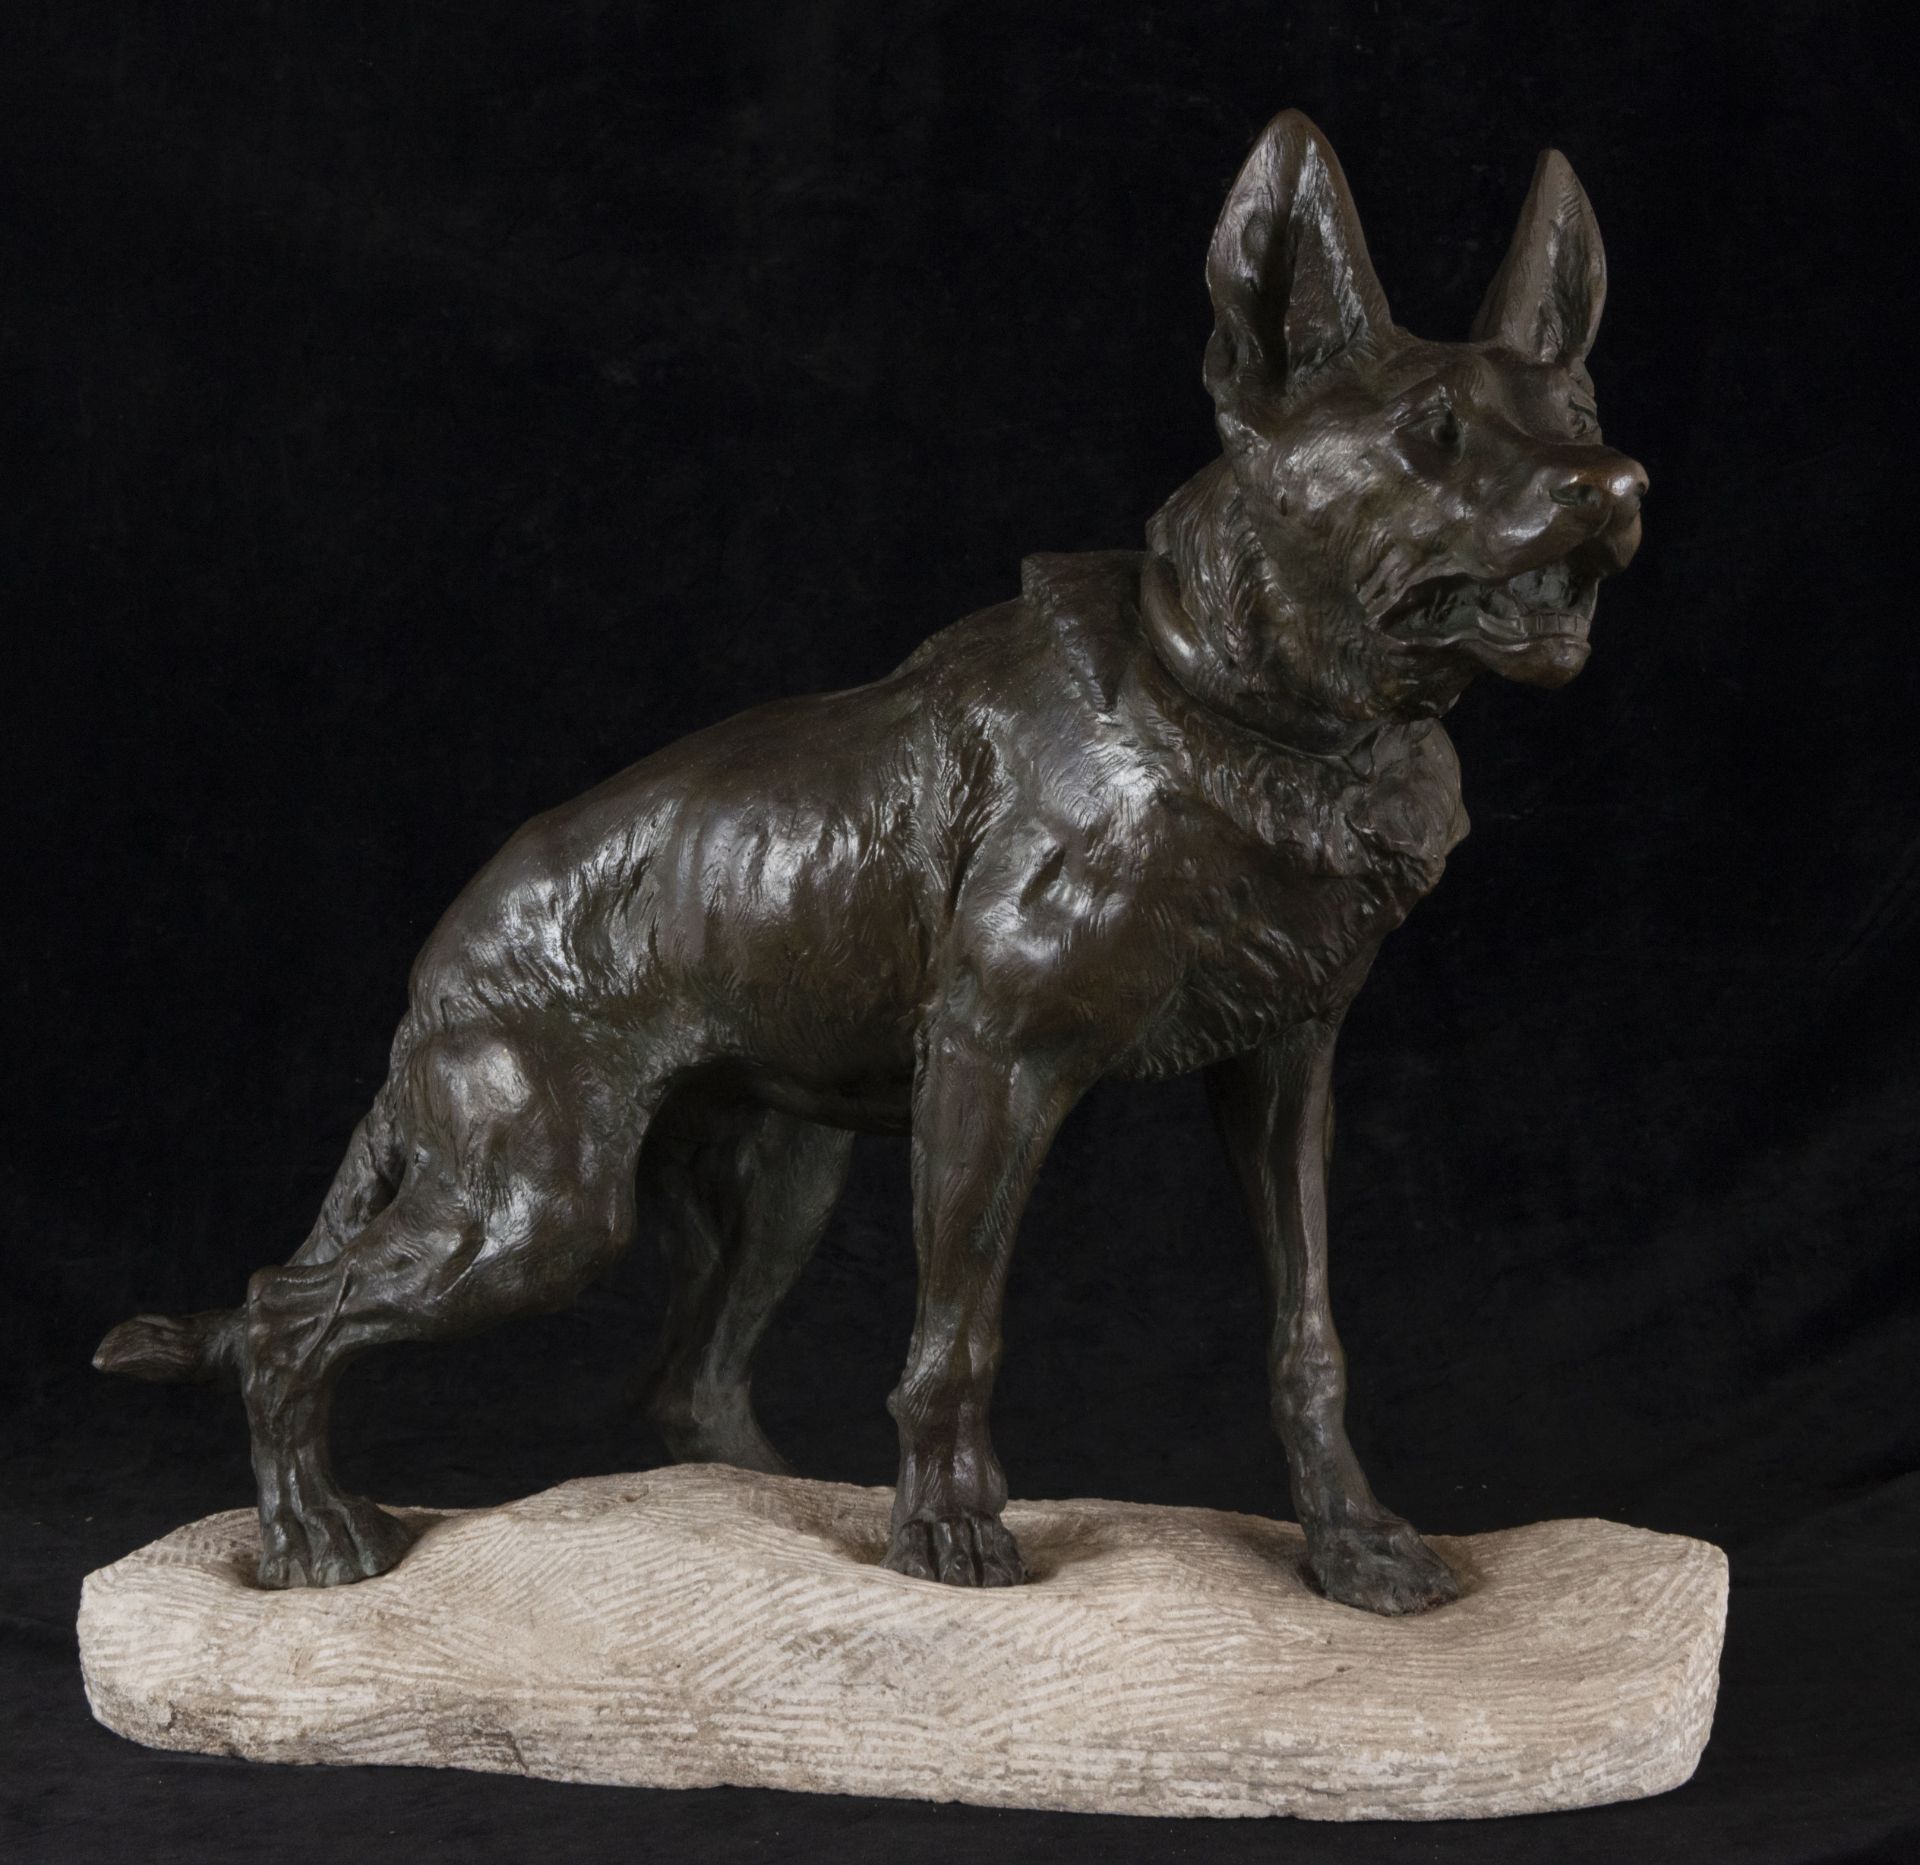 German Shepherd in Bronze, signed on the base Thomas Cartier (1879-1943), 1920s